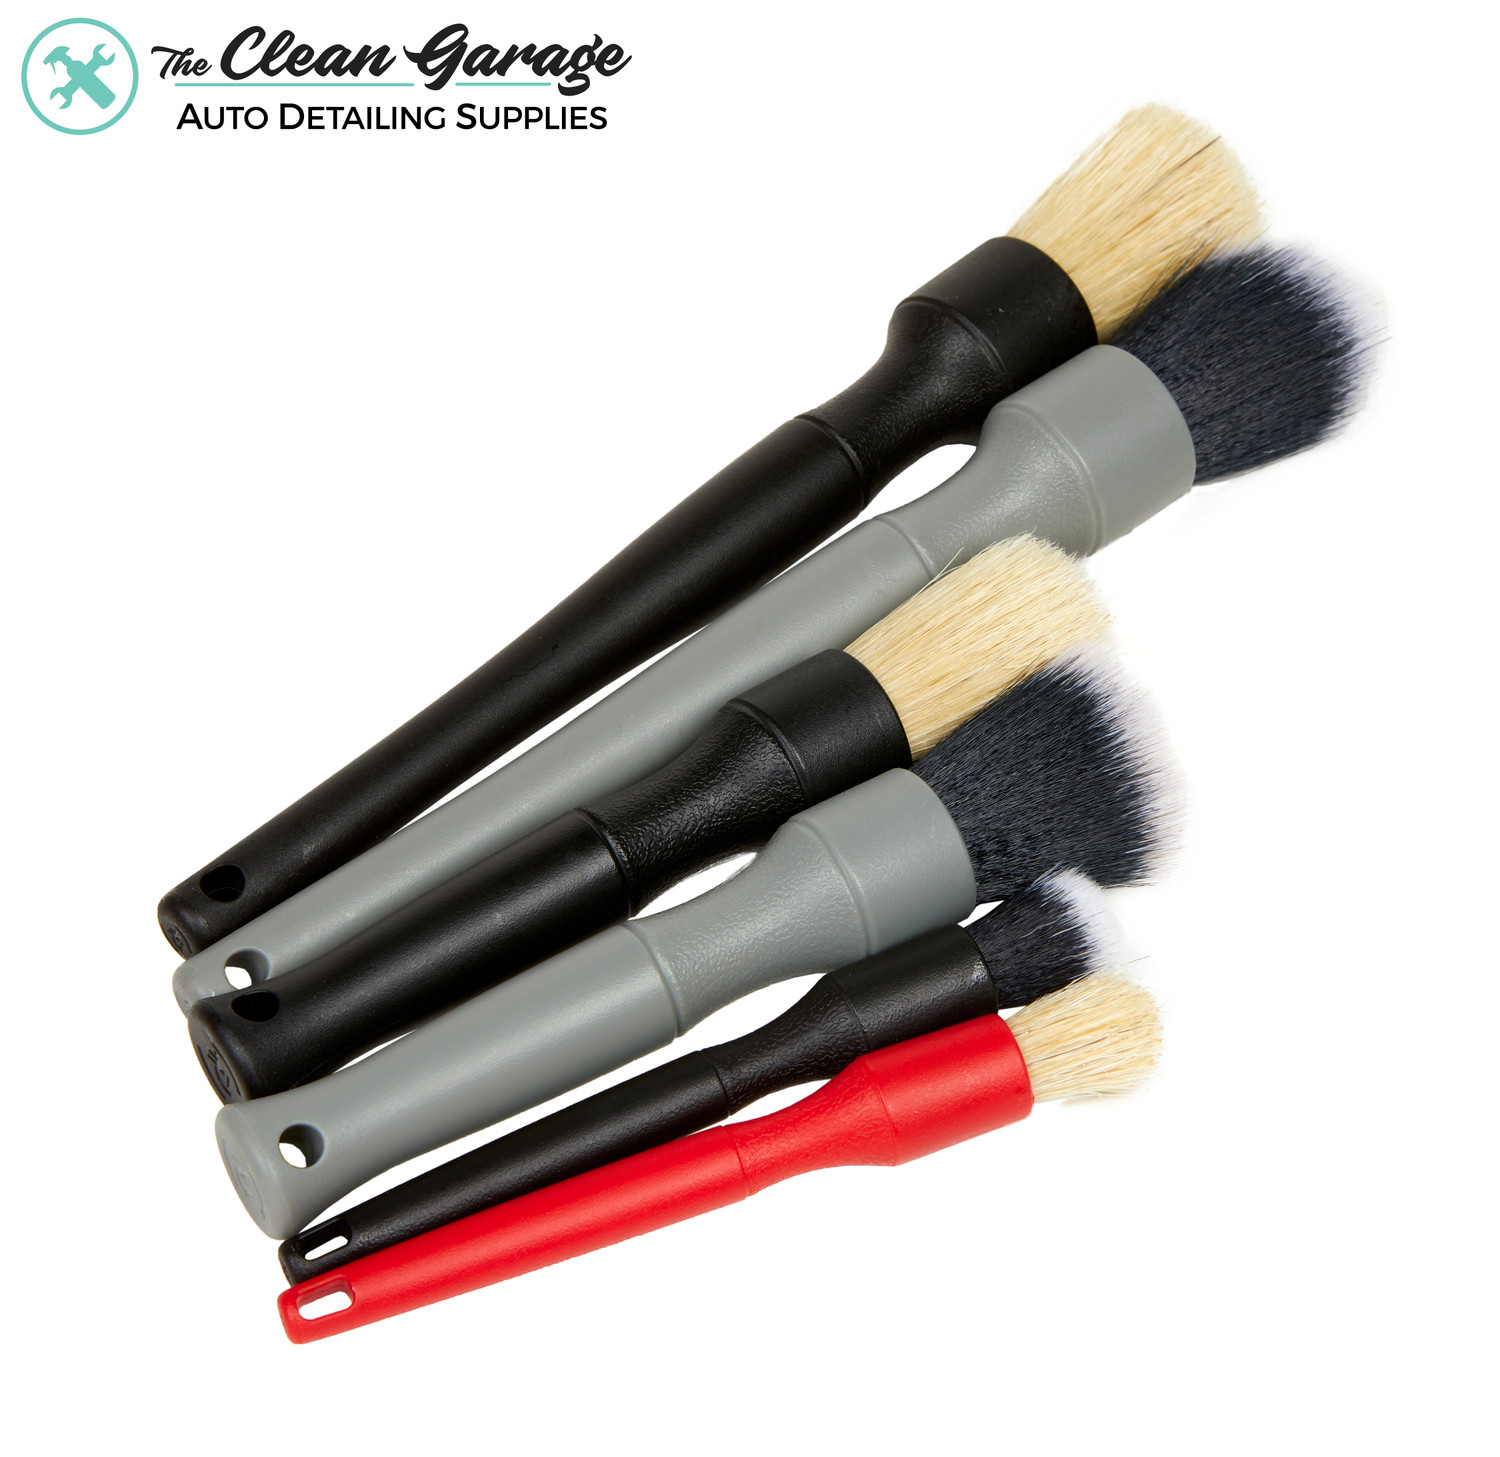  Gift2u 3 Pieces Boars Hair Ultra Soft Car Detail Brushes Auto  Detailing Brush Set 3 Different Premium Boar Hair Mixed Fiber with Plastic  Handle for Cleaning Wheels Interior Exterior Leather : Automotive